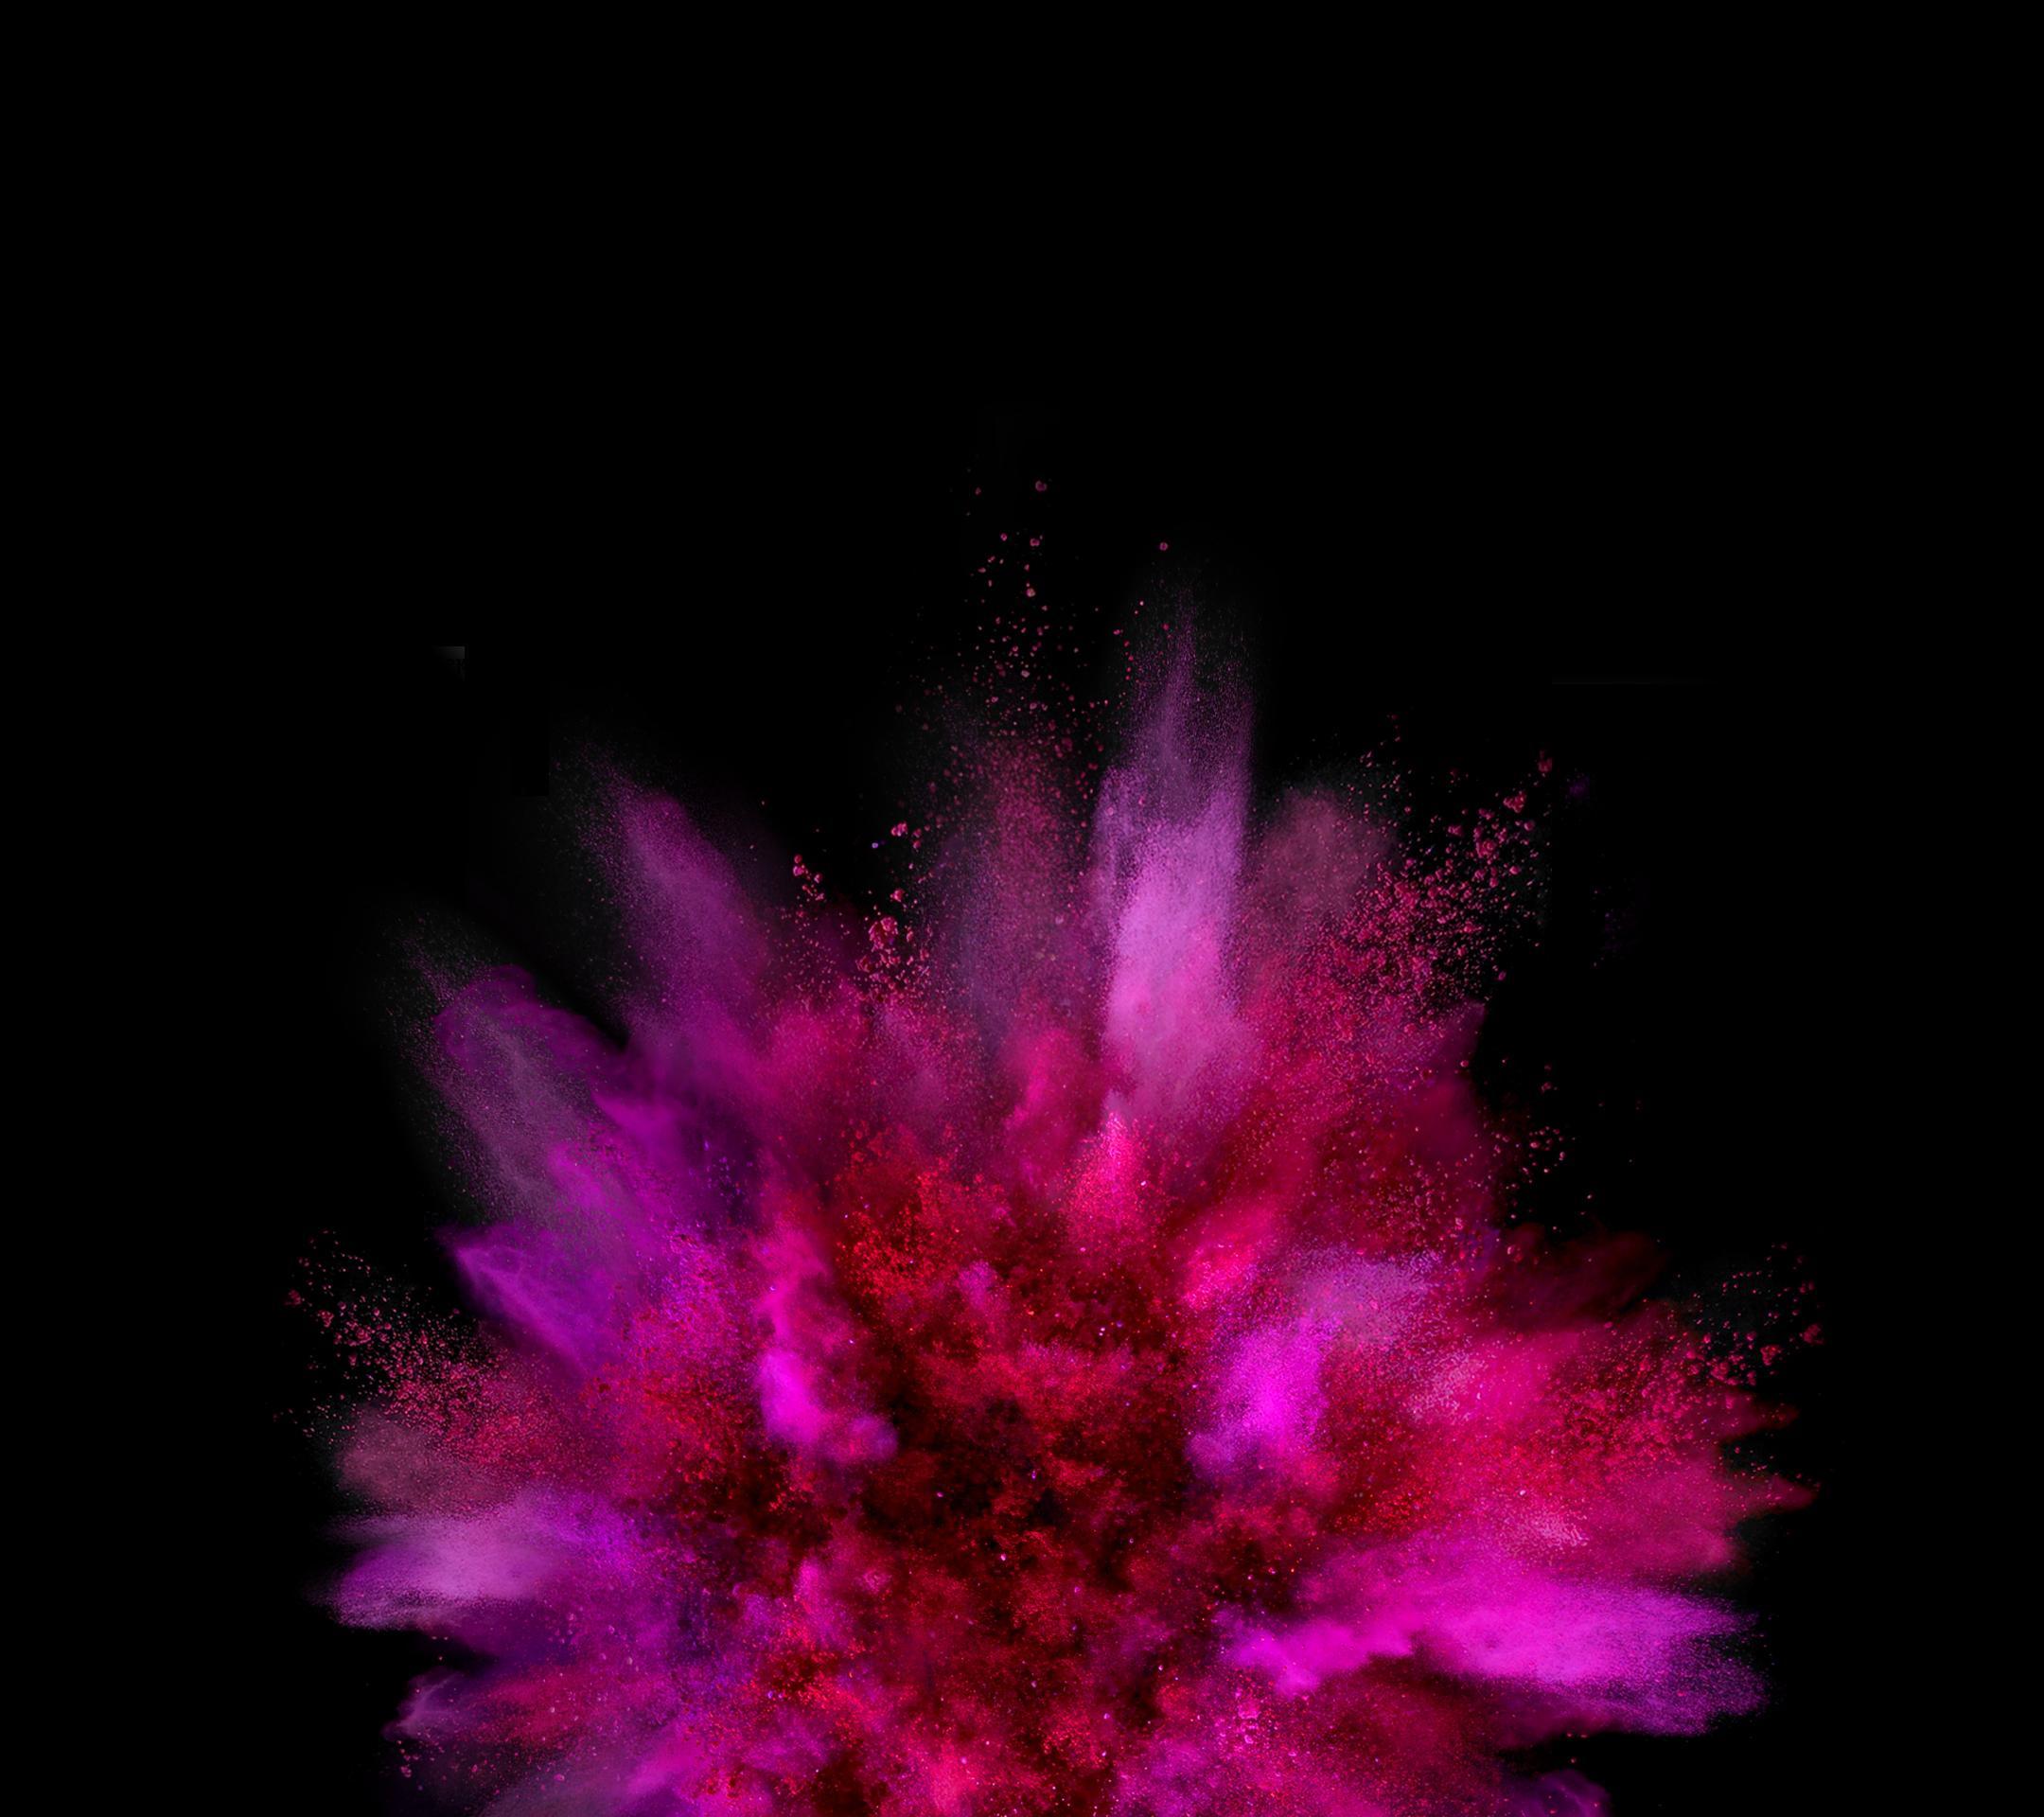 Free download Download all LG G Flex 2 high res wallpaper here